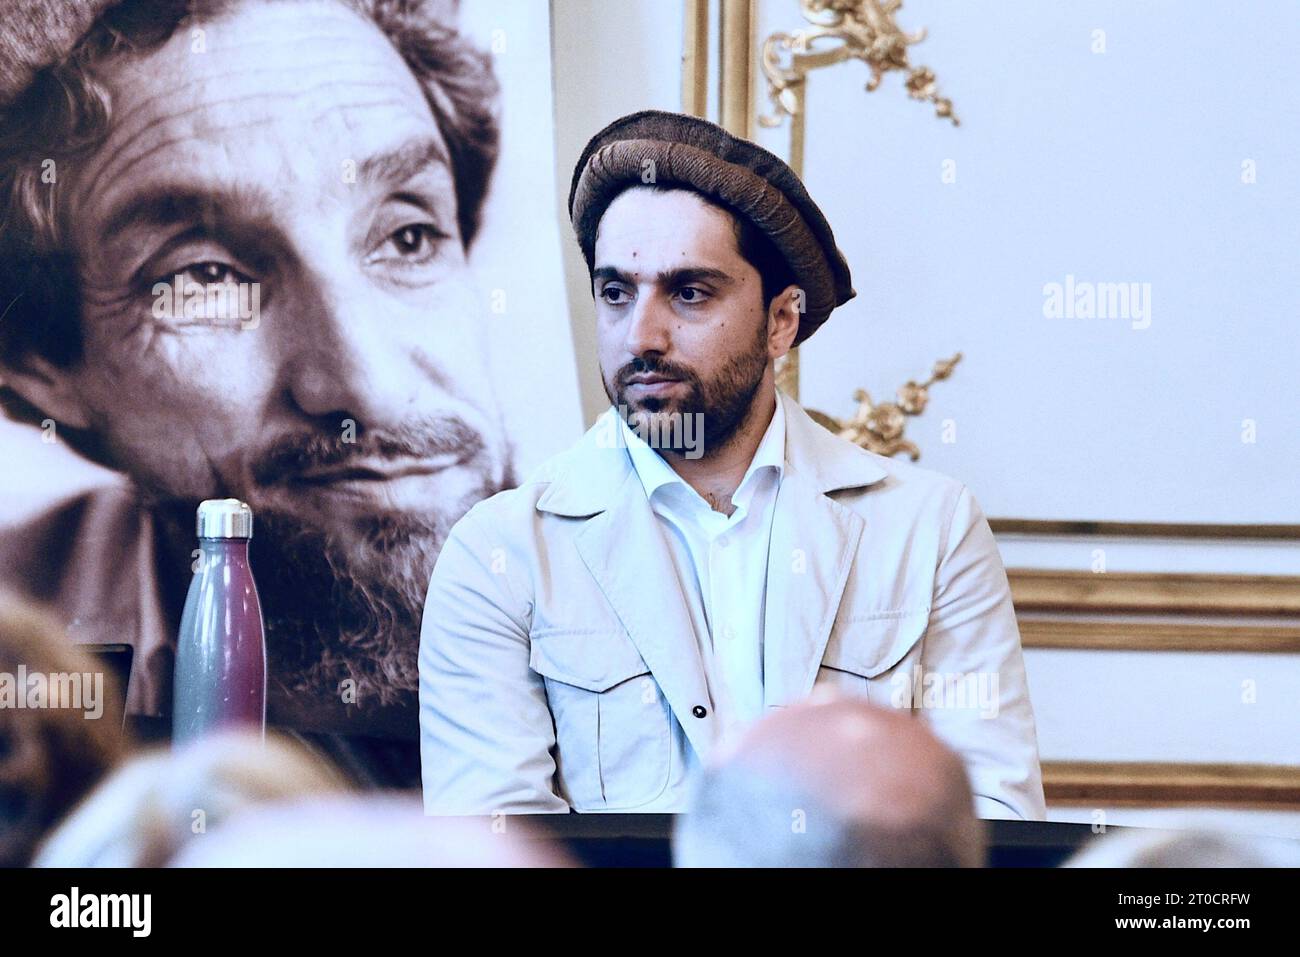 Ahmad Massoud, Afghan soldier and politician, son of Commander Ahmed Shah Massoud of Afghanistan's Panchir province, spent a day in Strasbourg as part of the Ideal Libraries literary festival. To mark the release of his book 'Our Freedom', Ahmad Massoud recalled his resistance to the Taliban regime. The event was attended by Reza Deghati, the photographer and reporter who shot the portrait of Commander Massoud in 1985, which toured the world. The faithful also came to support Commander Massoud's son. October 4, 2023, in Strasbourg Northeastern France. Photo by Nicolas Roses/ABACAPRESS.COM Stock Photo